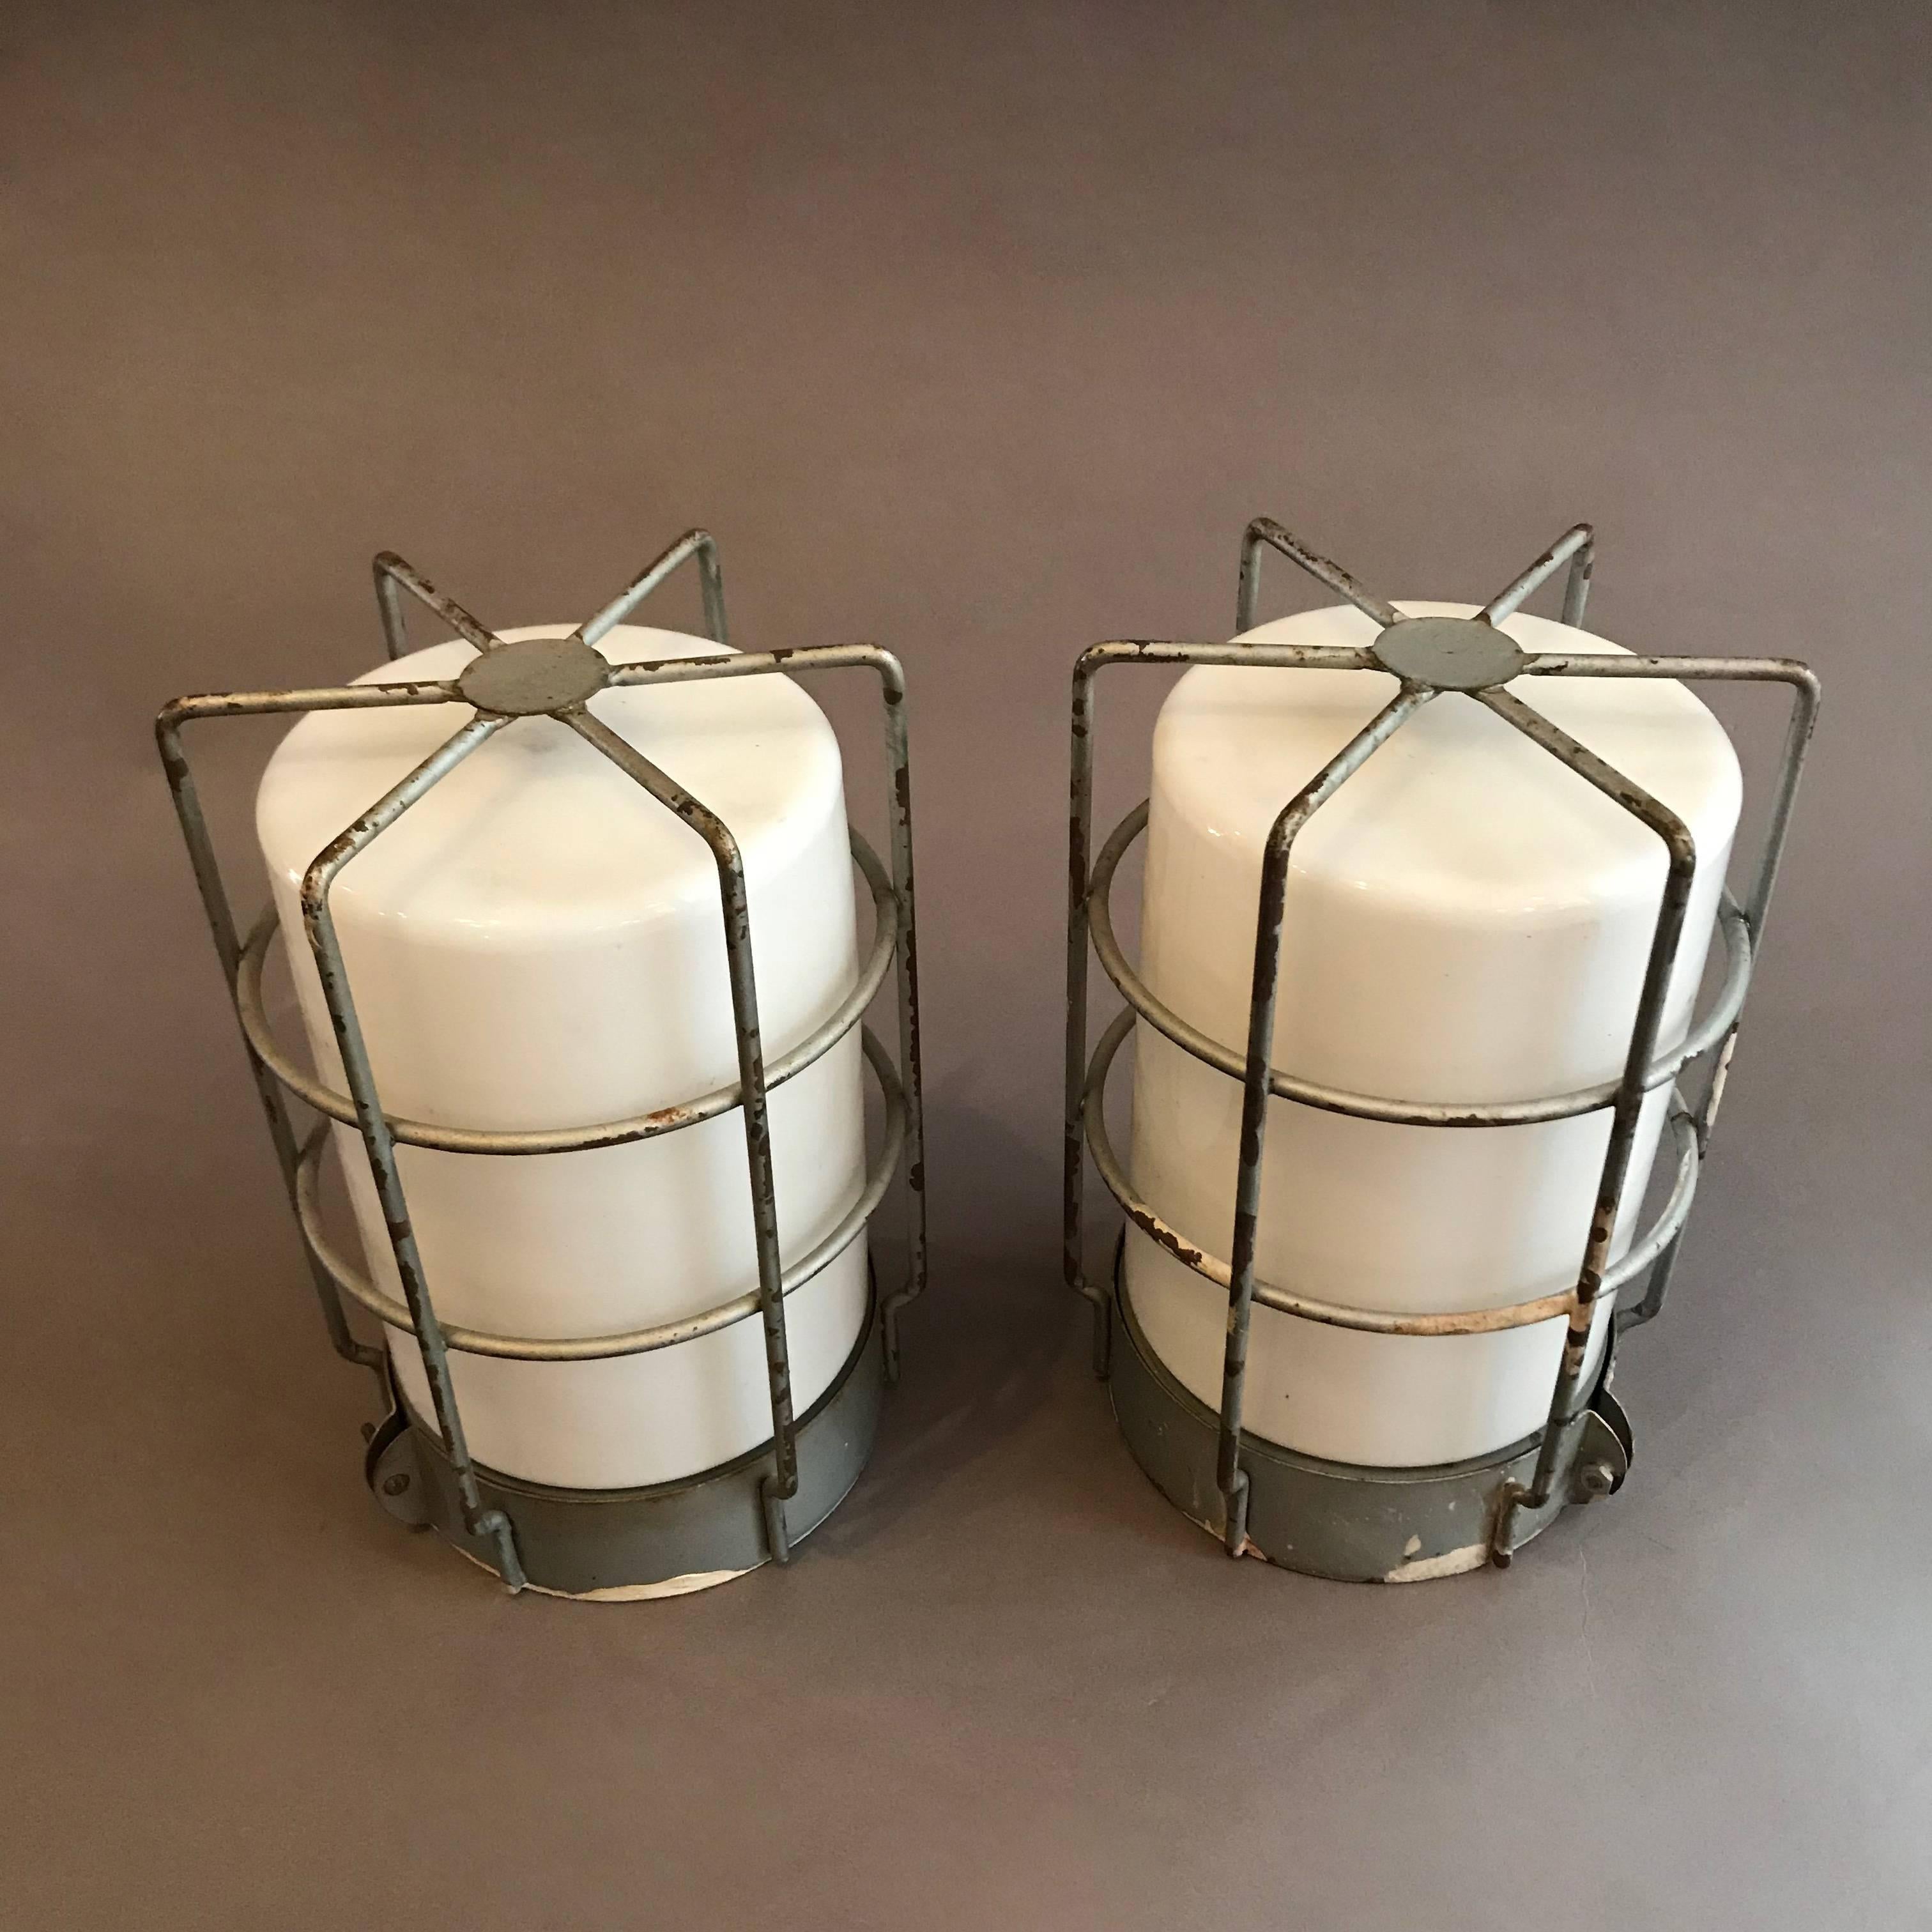 American Industrial Caged Milk Glass Wall Sconce Flush Mount Ceiling Lights